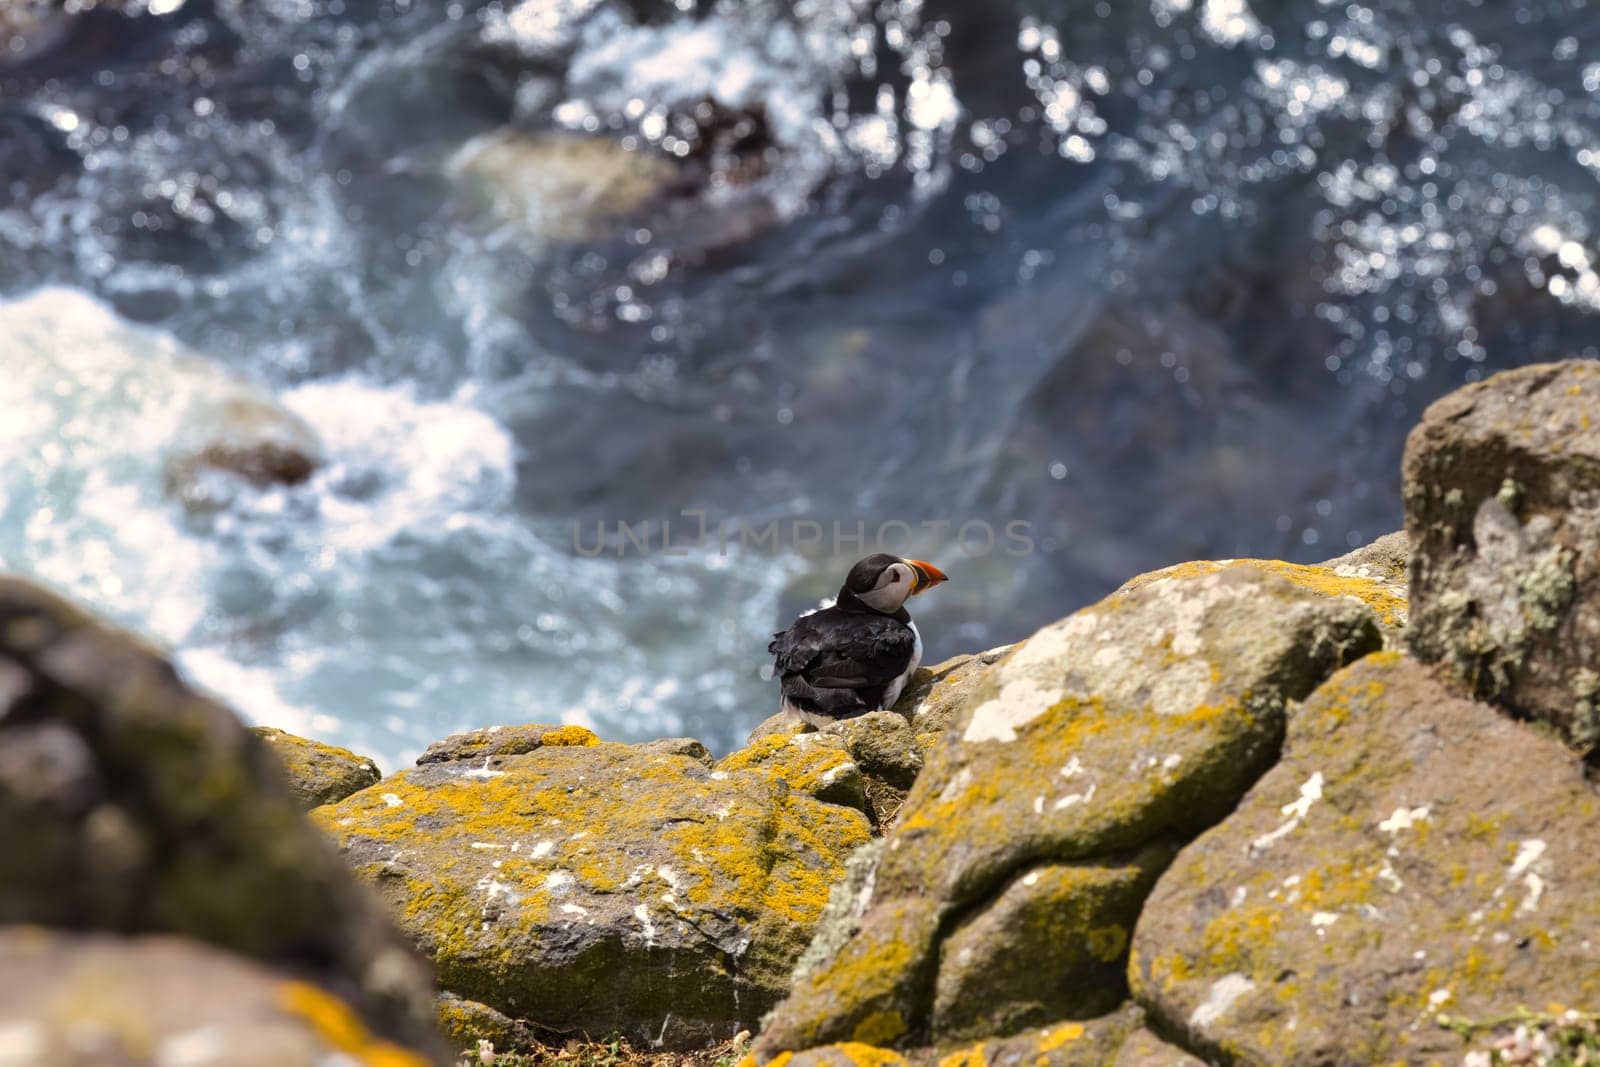 Evoke the grandeur and tranquility of coastal life with this captivating photograph featuring a puffin poised on the edge of a cliff, with the drama of ocean waves rolling in the background. The puffin serves as a charismatic focal point, its iconic plumage contrasting beautifully with the turbulent sea. The composition captures both the stillness of the bird and the movement of the ocean, creating a harmonious balance that speaks to the enduring allure of the natural world.